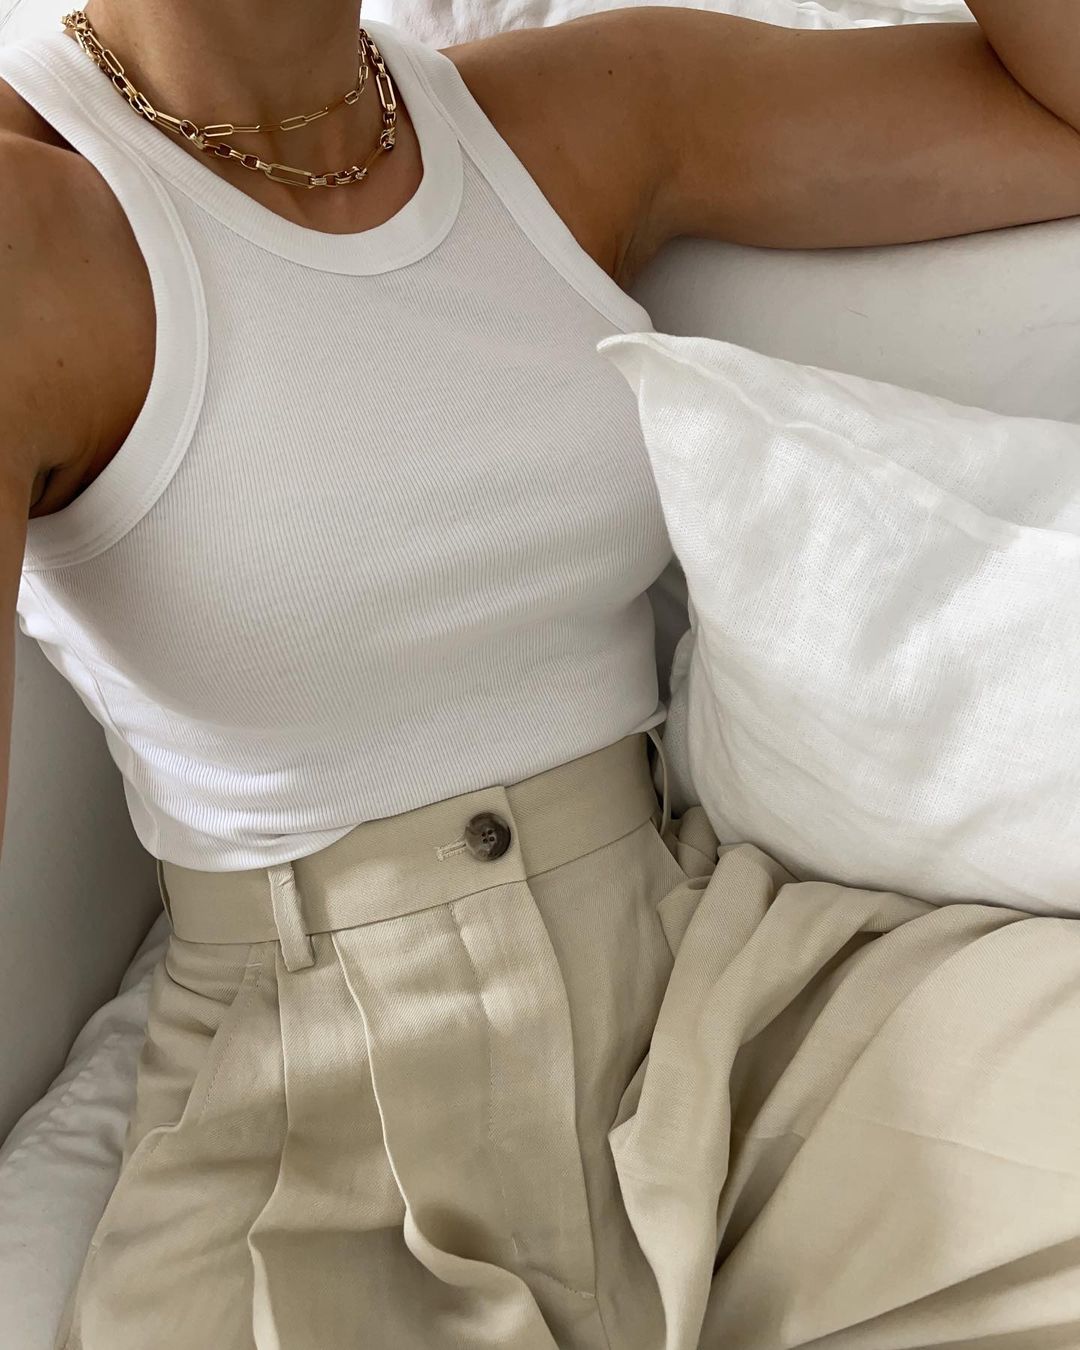 How to Style a Tank Top: @_jessicaskye wears a tank top with lightweight tailored trousers